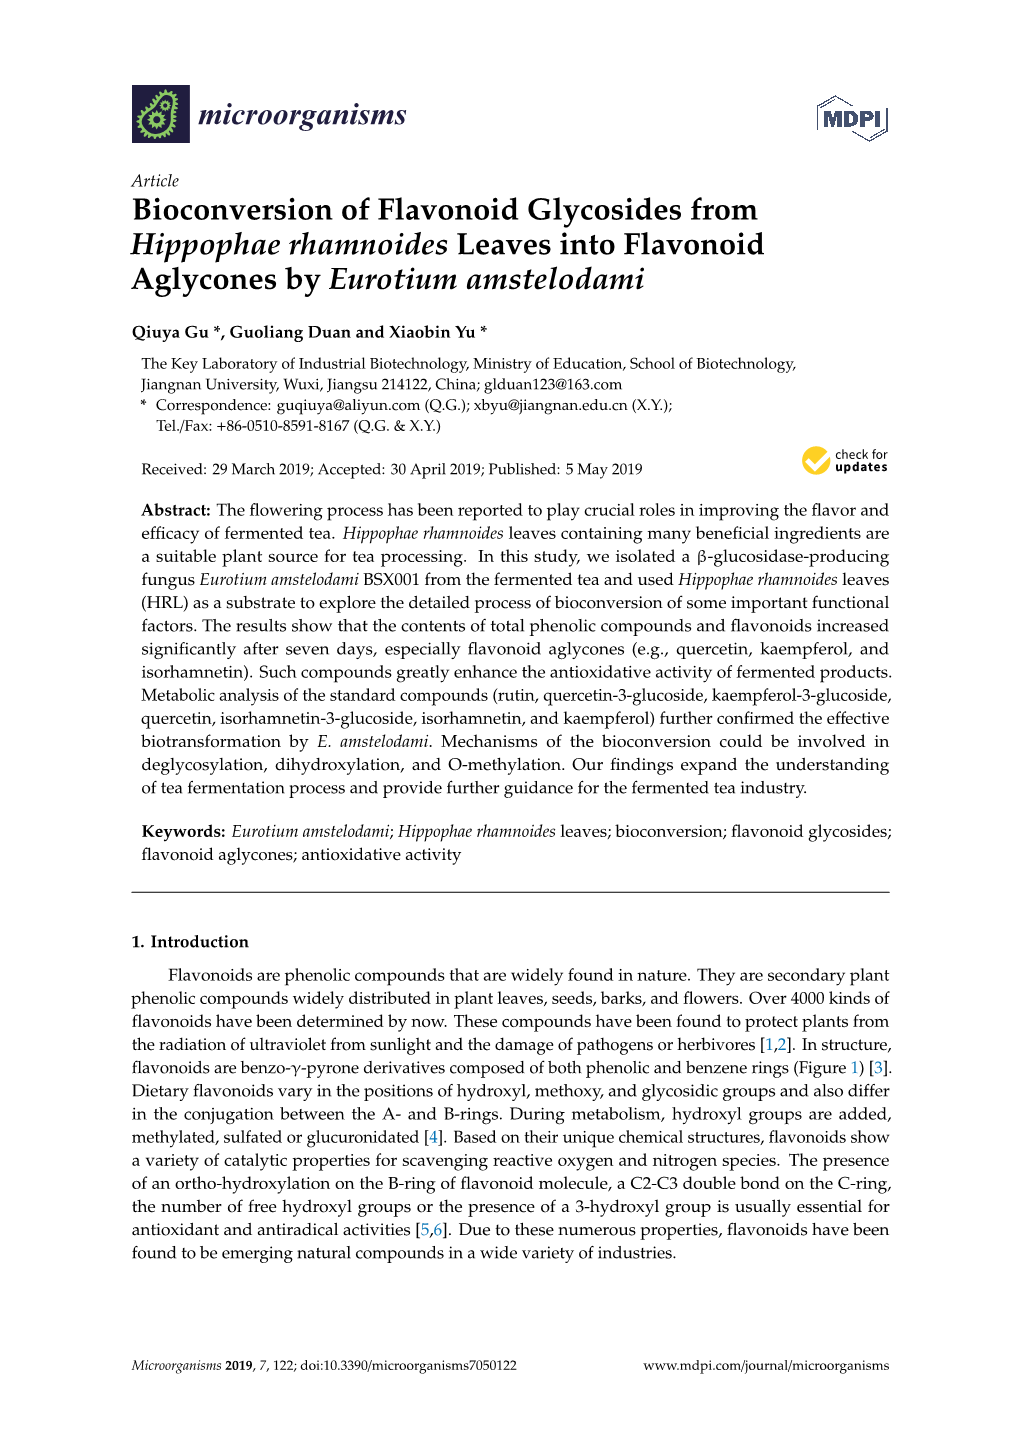 Bioconversion of Flavonoid Glycosides from Hippophae Rhamnoides Leaves Into Flavonoid Aglycones by Eurotium Amstelodami